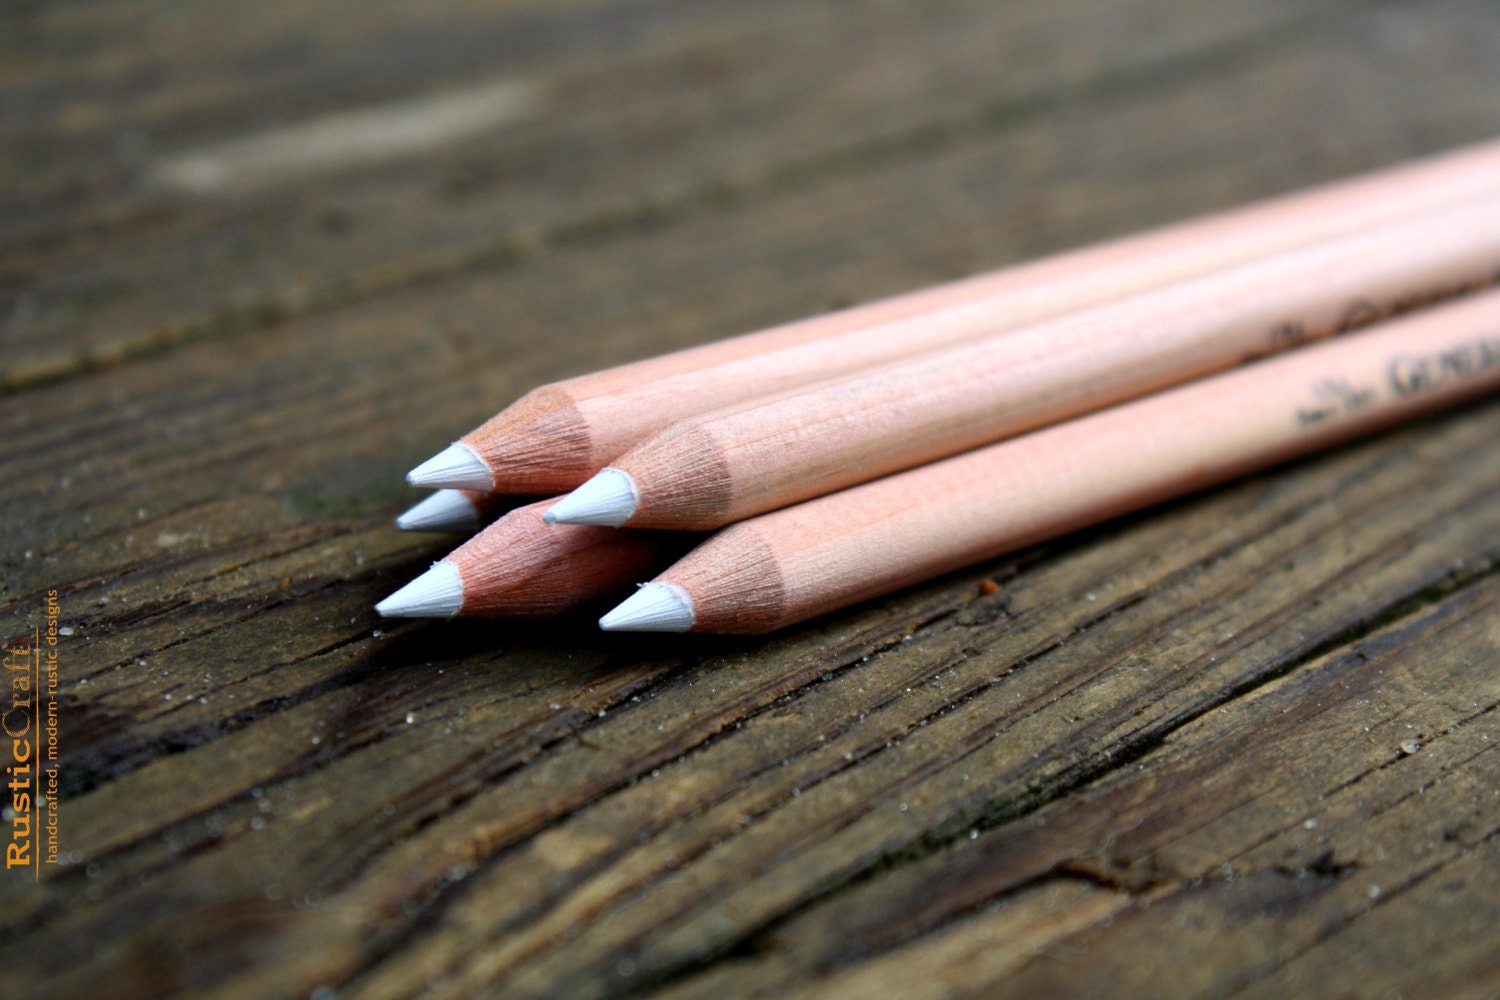 Slate Pencils White Color Natural Found Stone THIN 4 to 5 mm Thickness  Choose Quantity Free Shipping